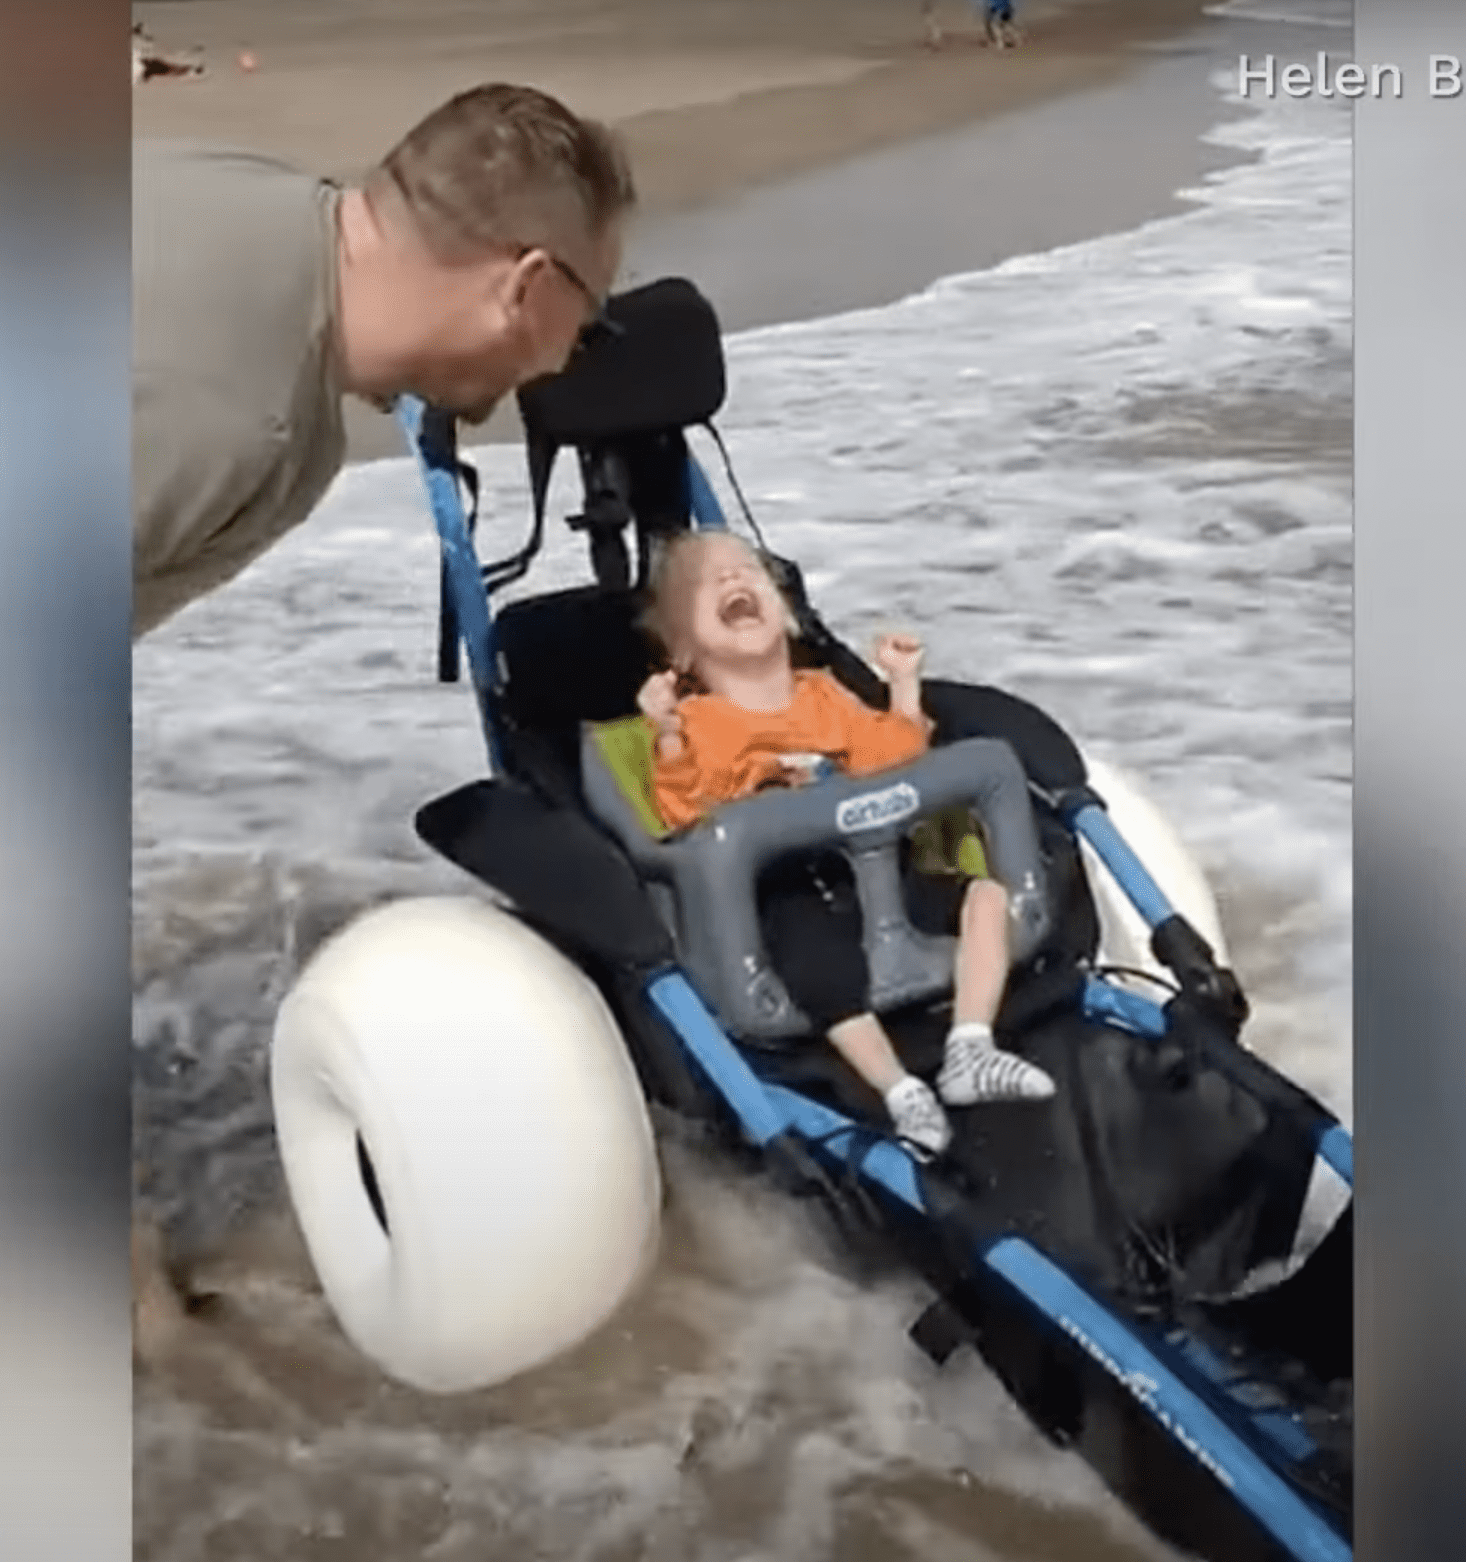 Little Joey Leathwood is seen giggling as the tumbling waves wash the shore. | Source: facebook.com/CBSNews